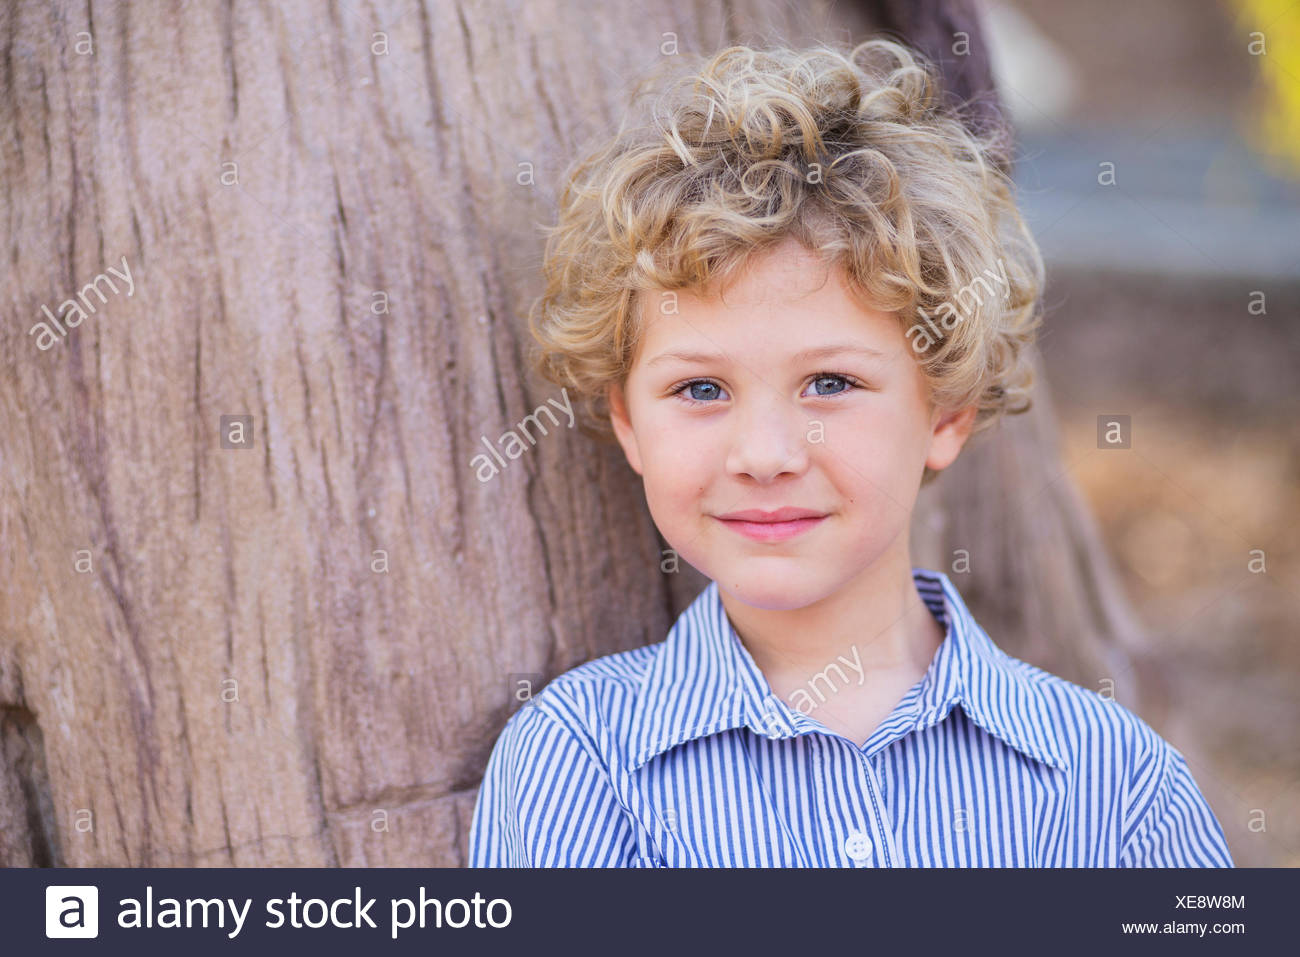 Portrait Of A Young Boy With Blond Curly Hair And Blue Eyes